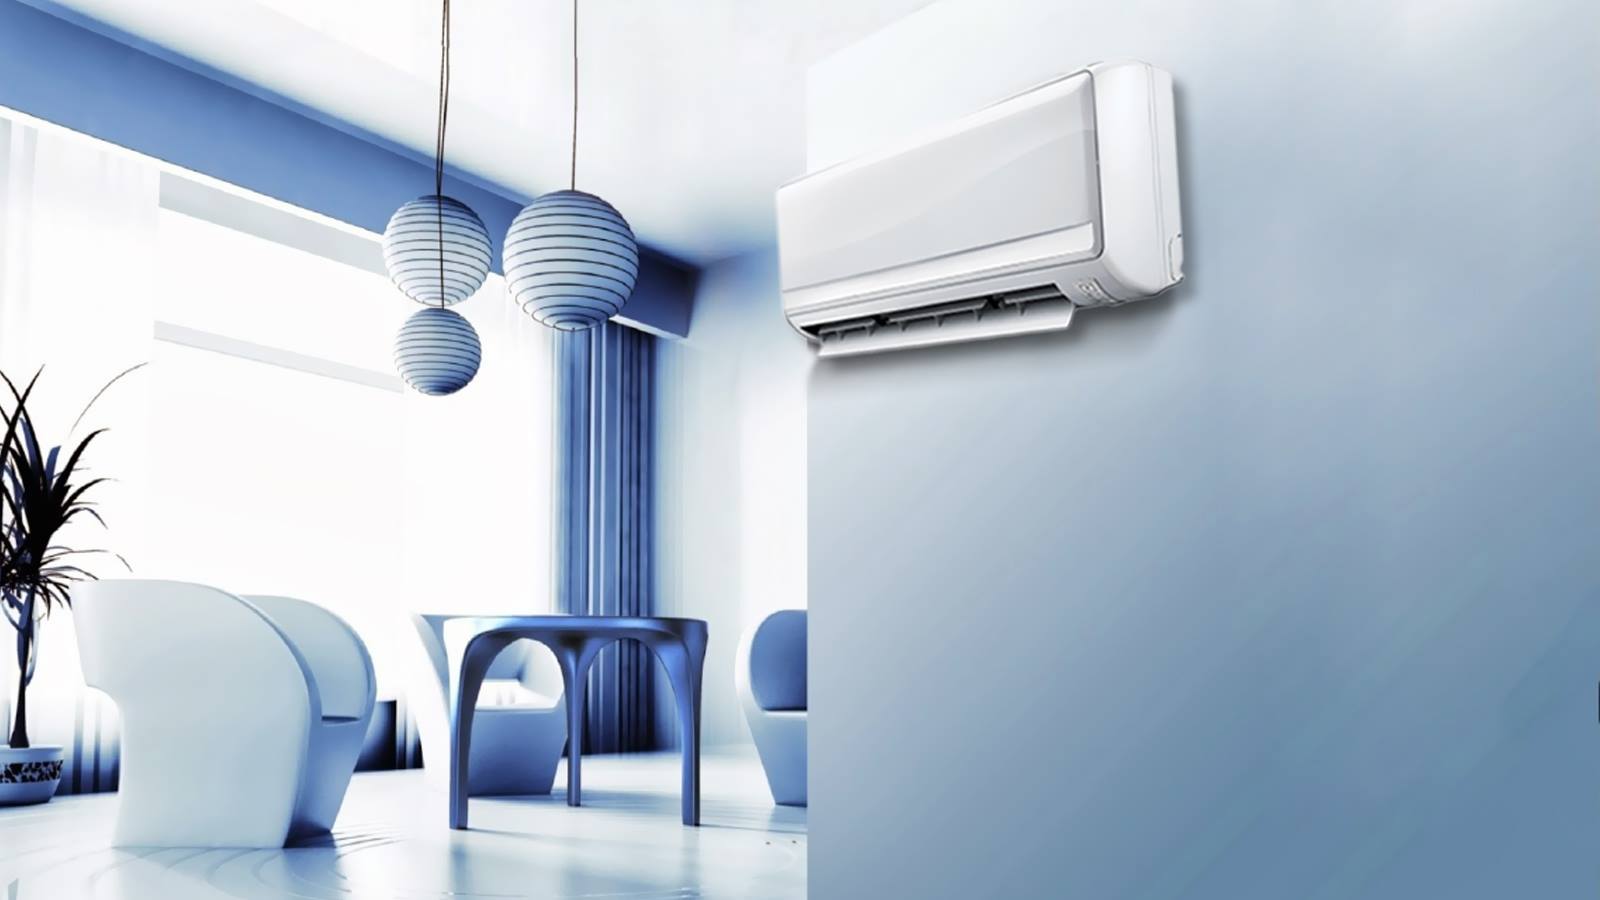 How to Choose an AC? Buying Guide for ACs in 2022